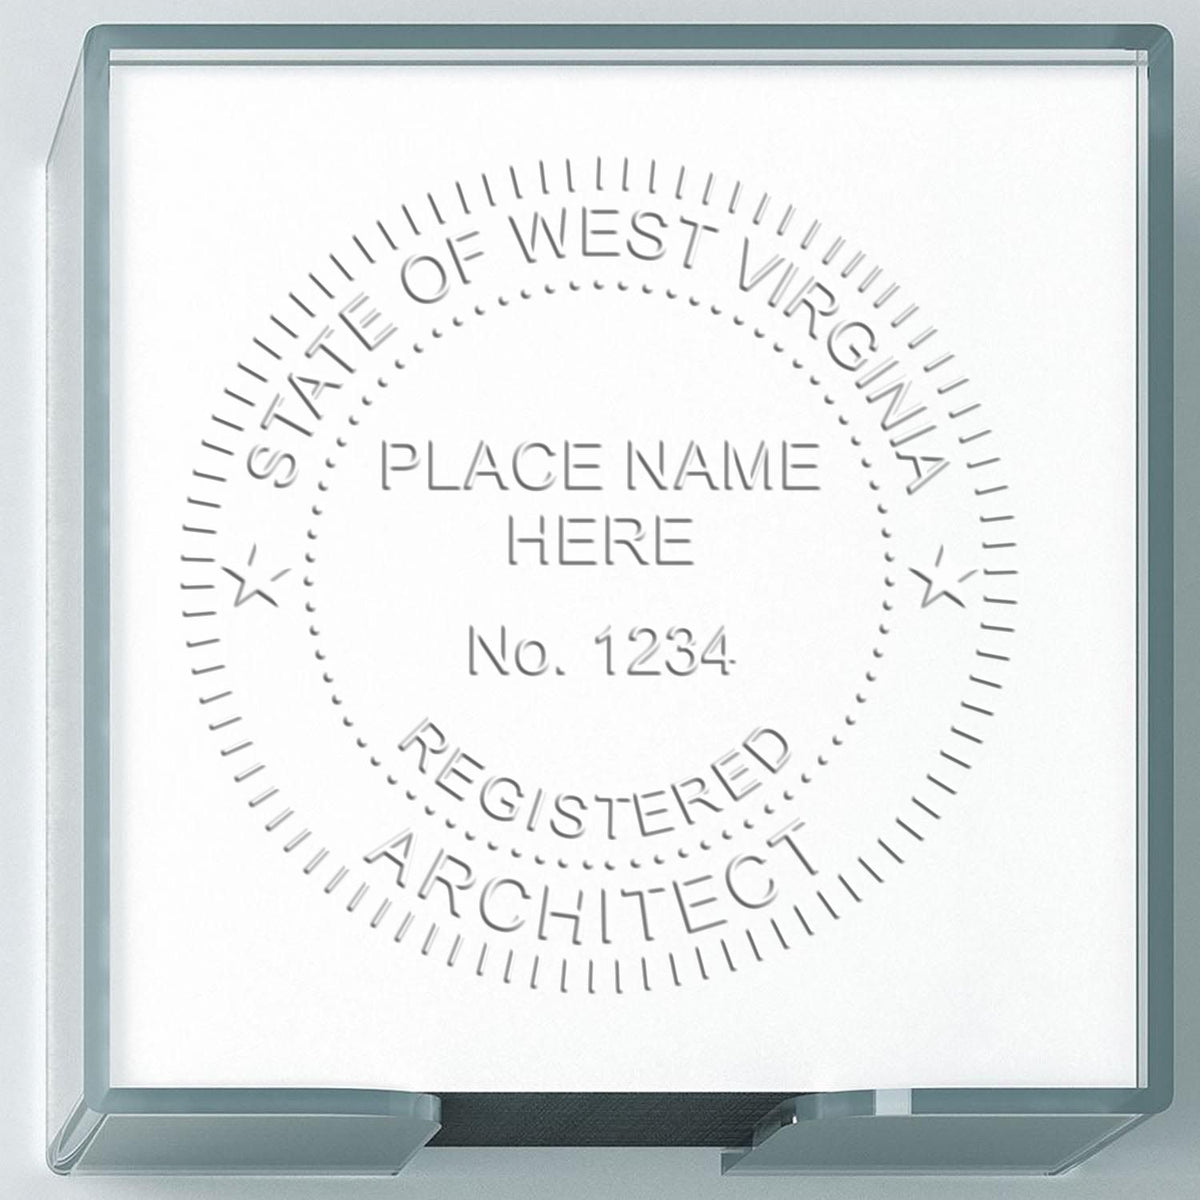 An alternative view of the State of West Virginia Long Reach Architectural Embossing Seal stamped on a sheet of paper showing the image in use